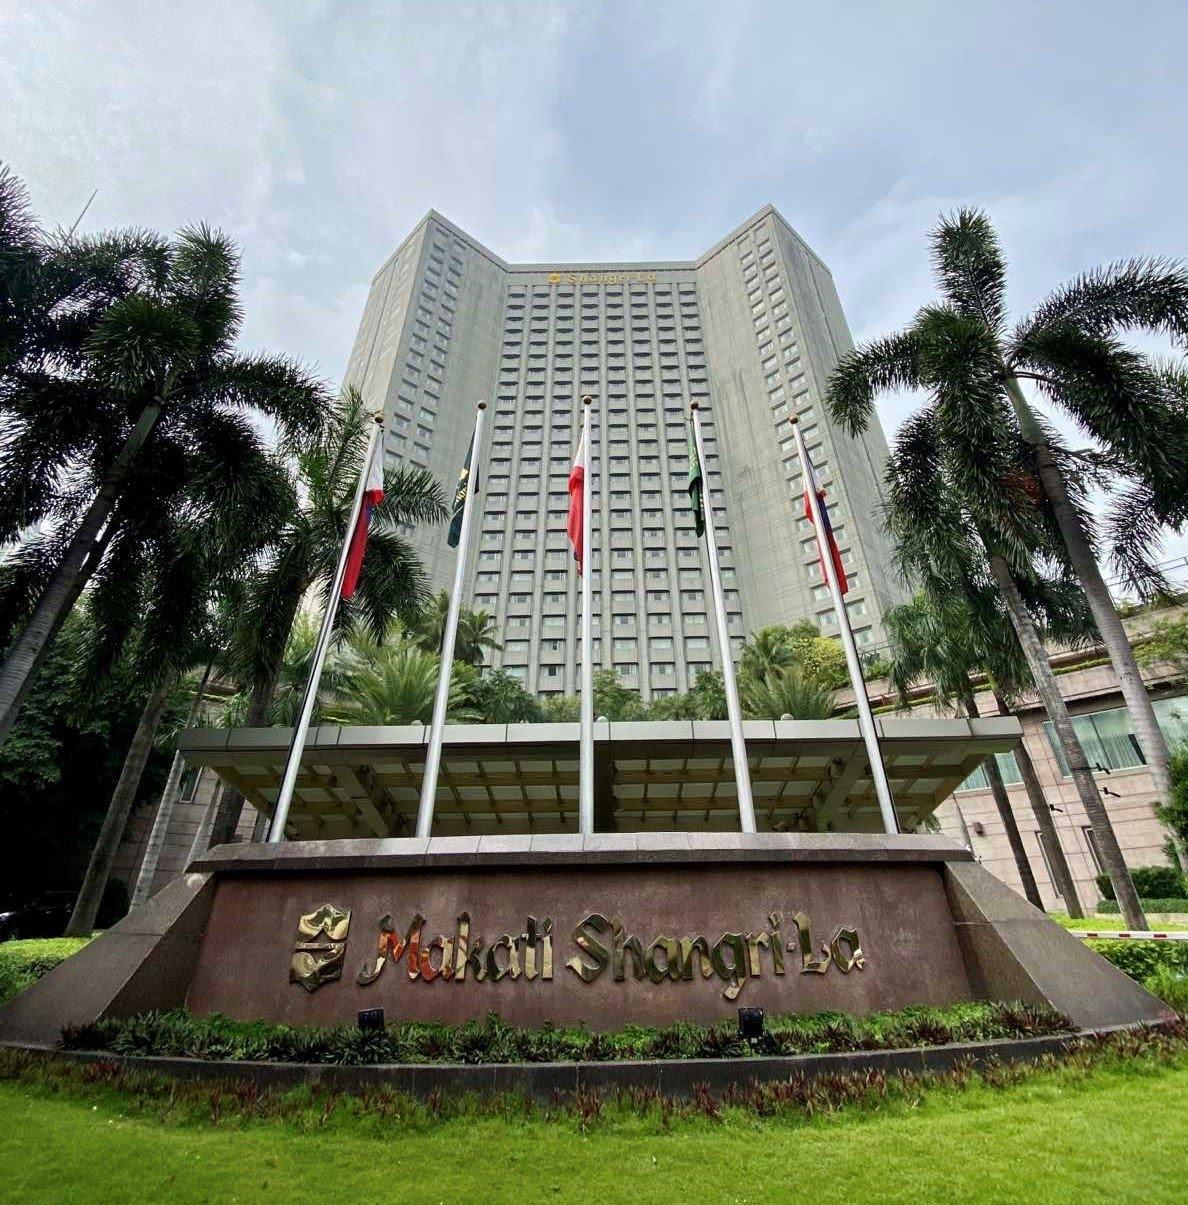 Why Makati Shangri-La Took a Temporary Rest